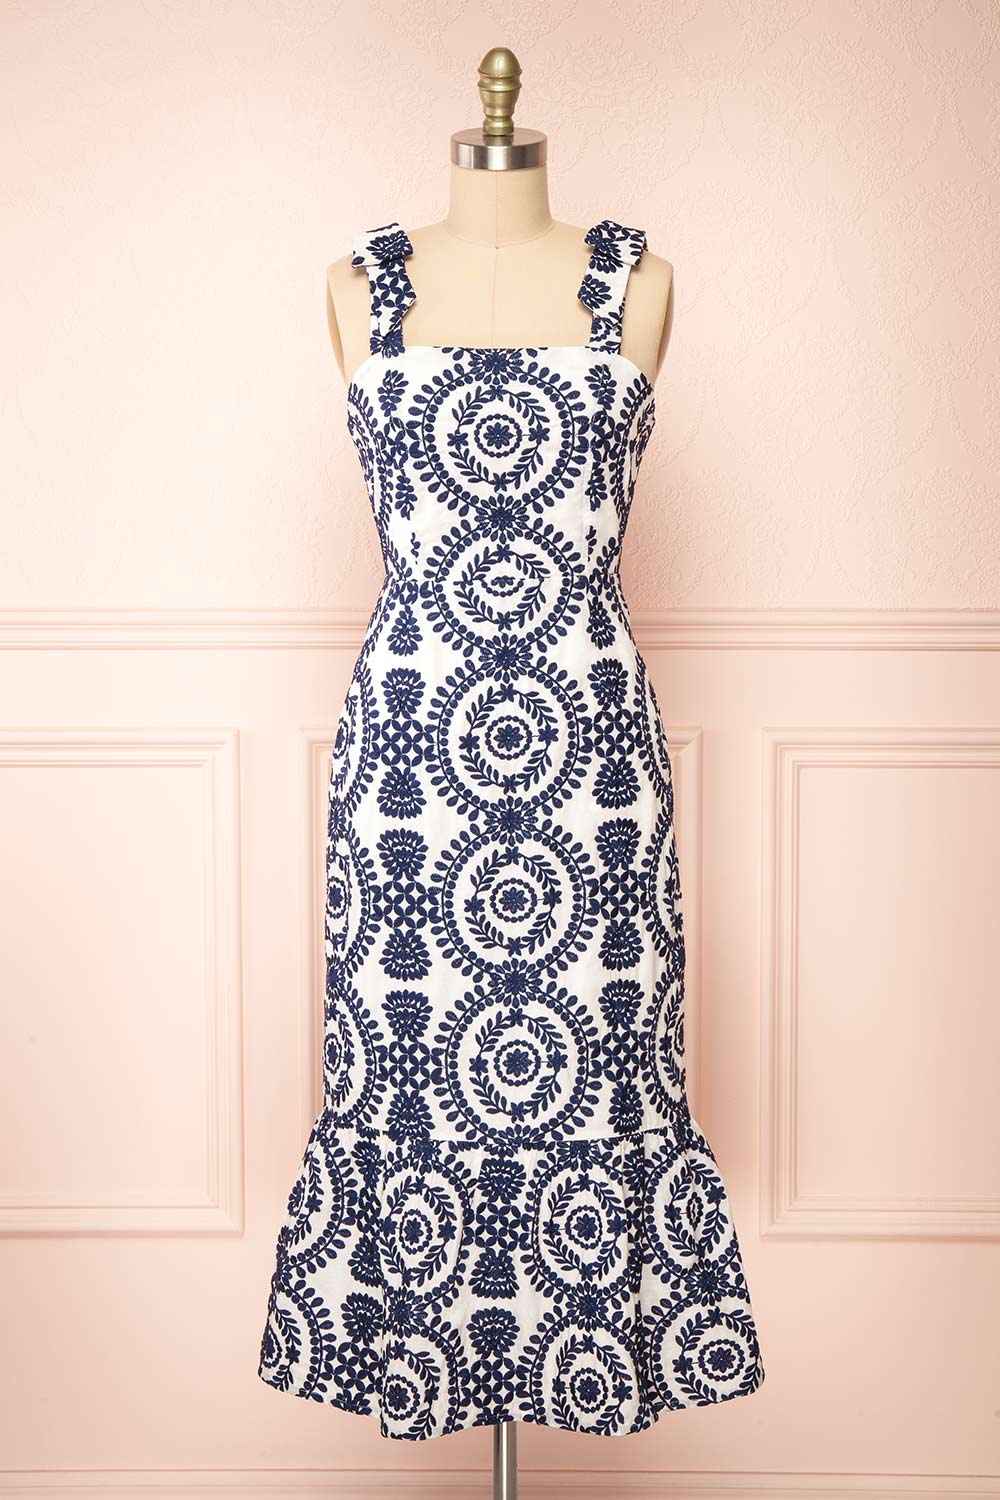 Gisa White Midi Dress w/ Navy Floral Embroidery | Boutique 1861 front view